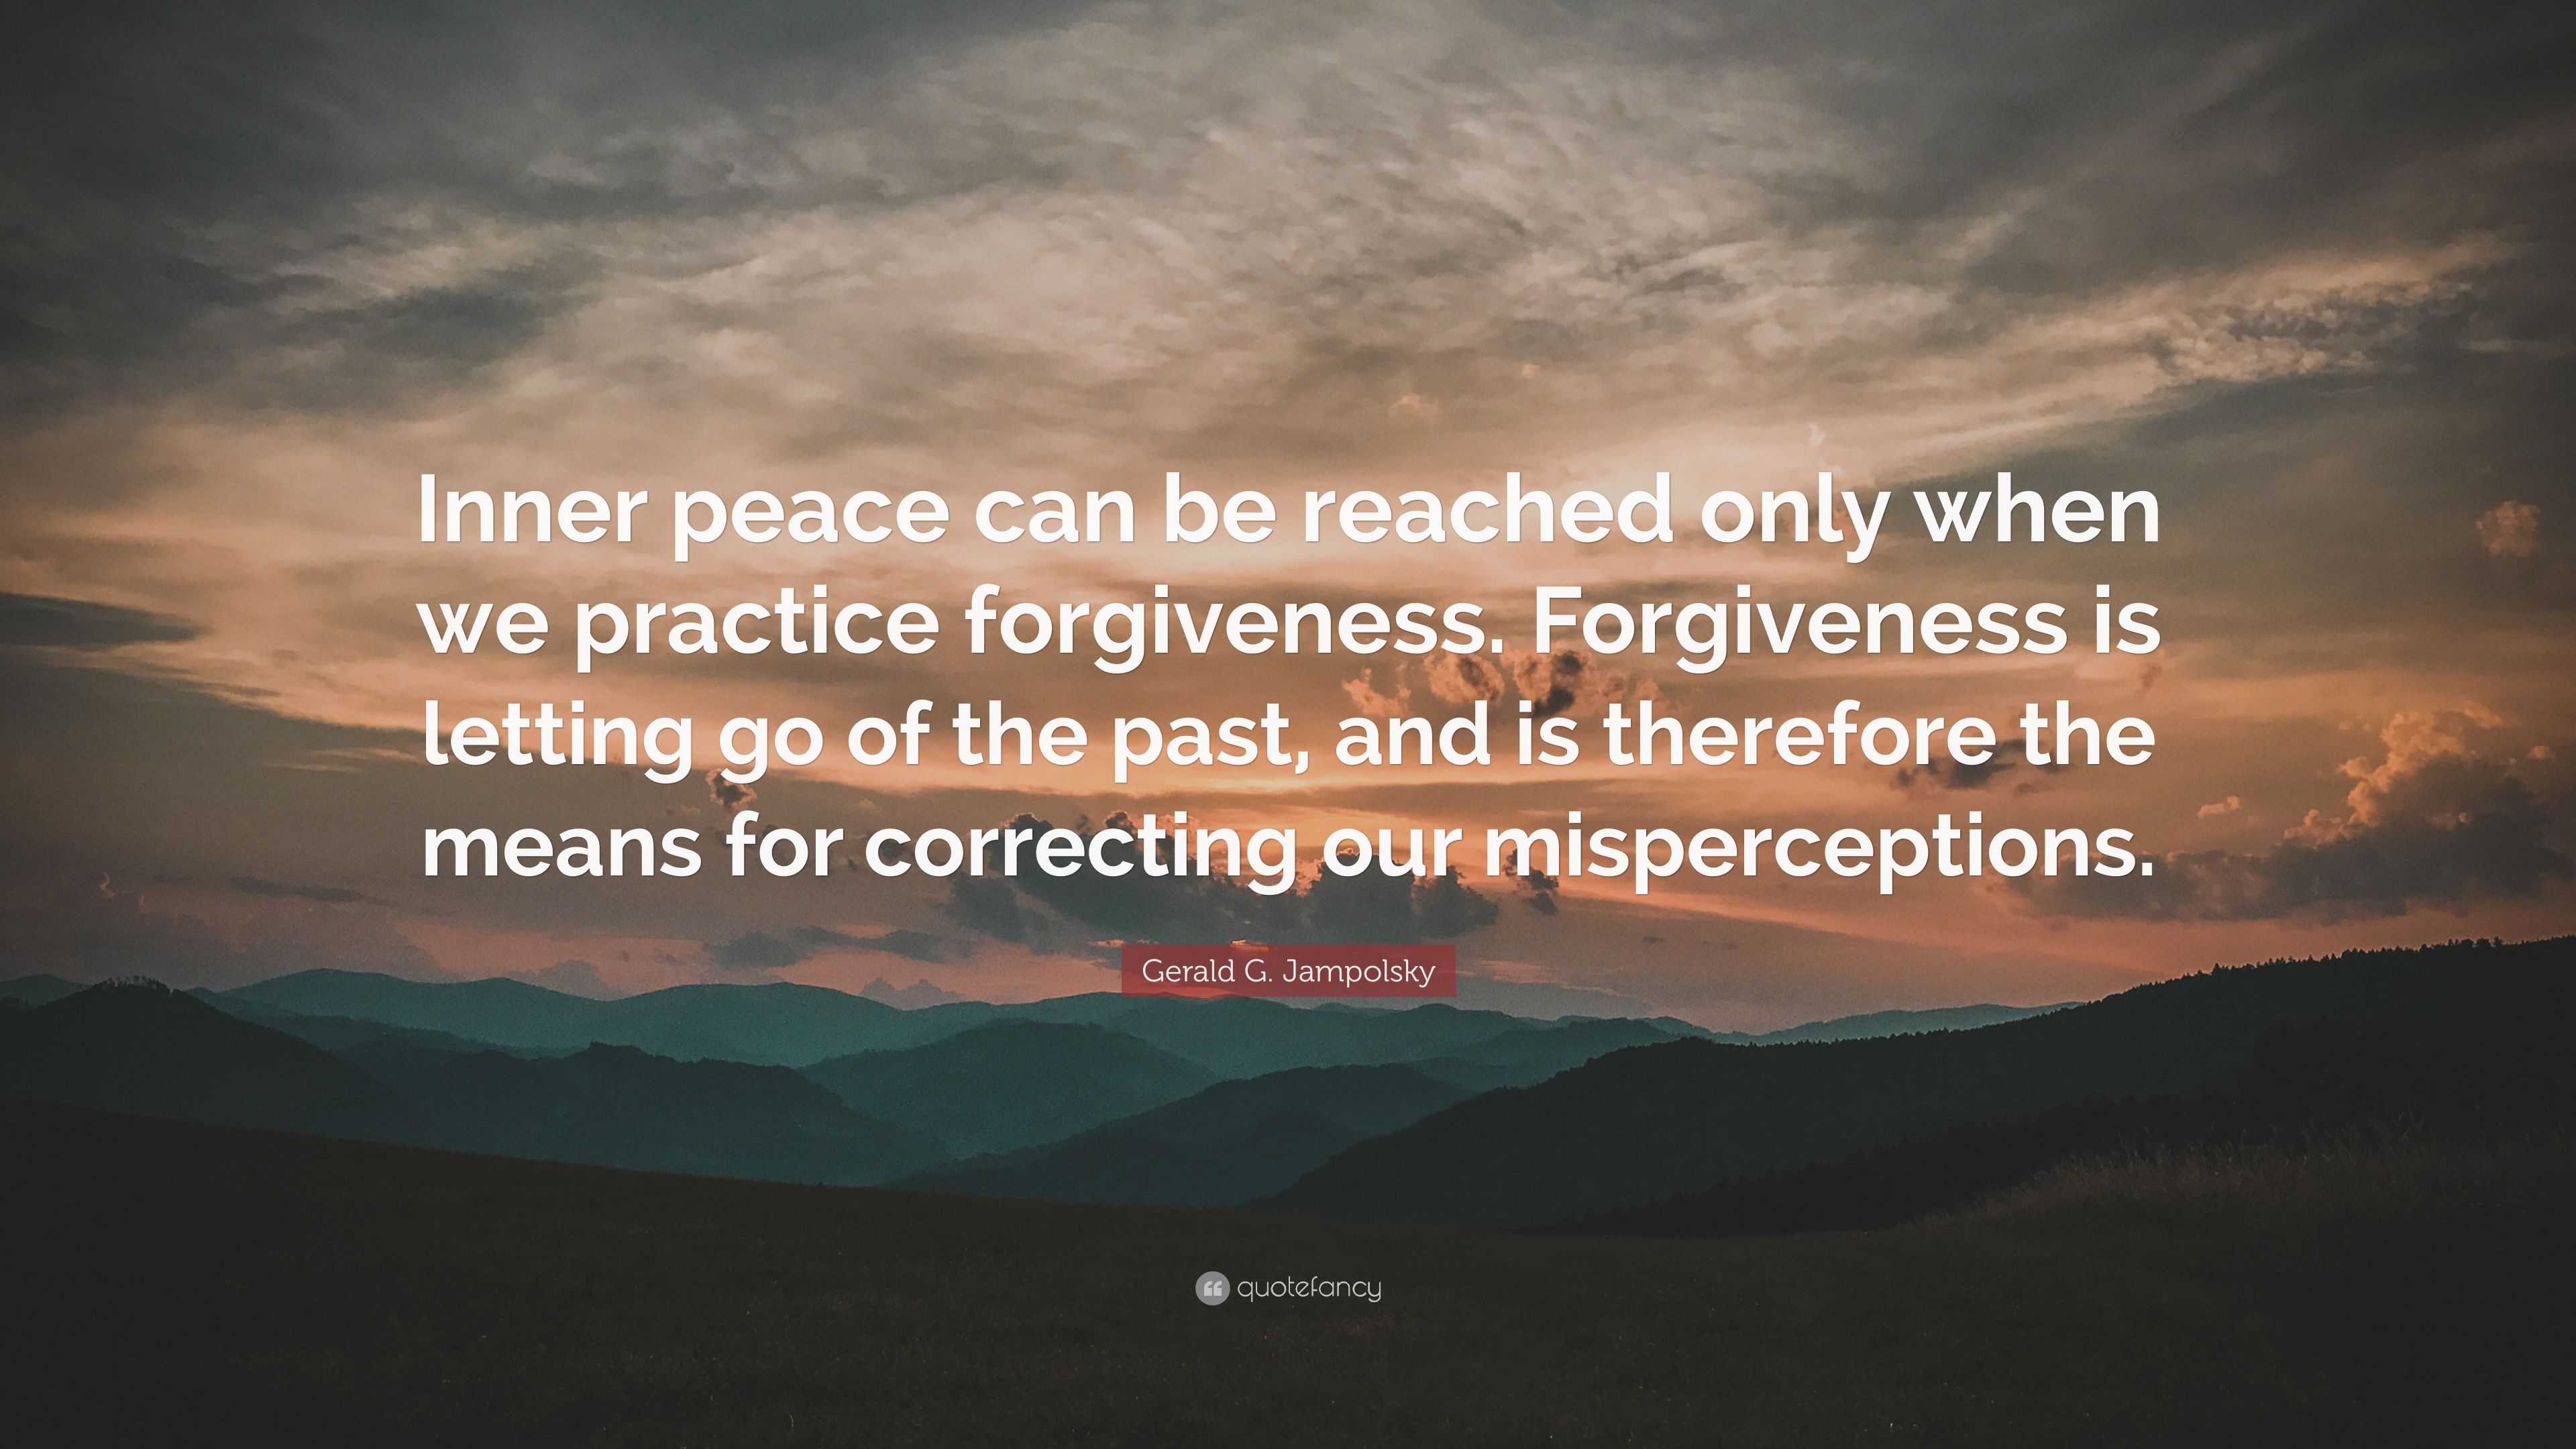 Gerald G. Jampolsky Quote: “Inner peace can be reached only when we ...